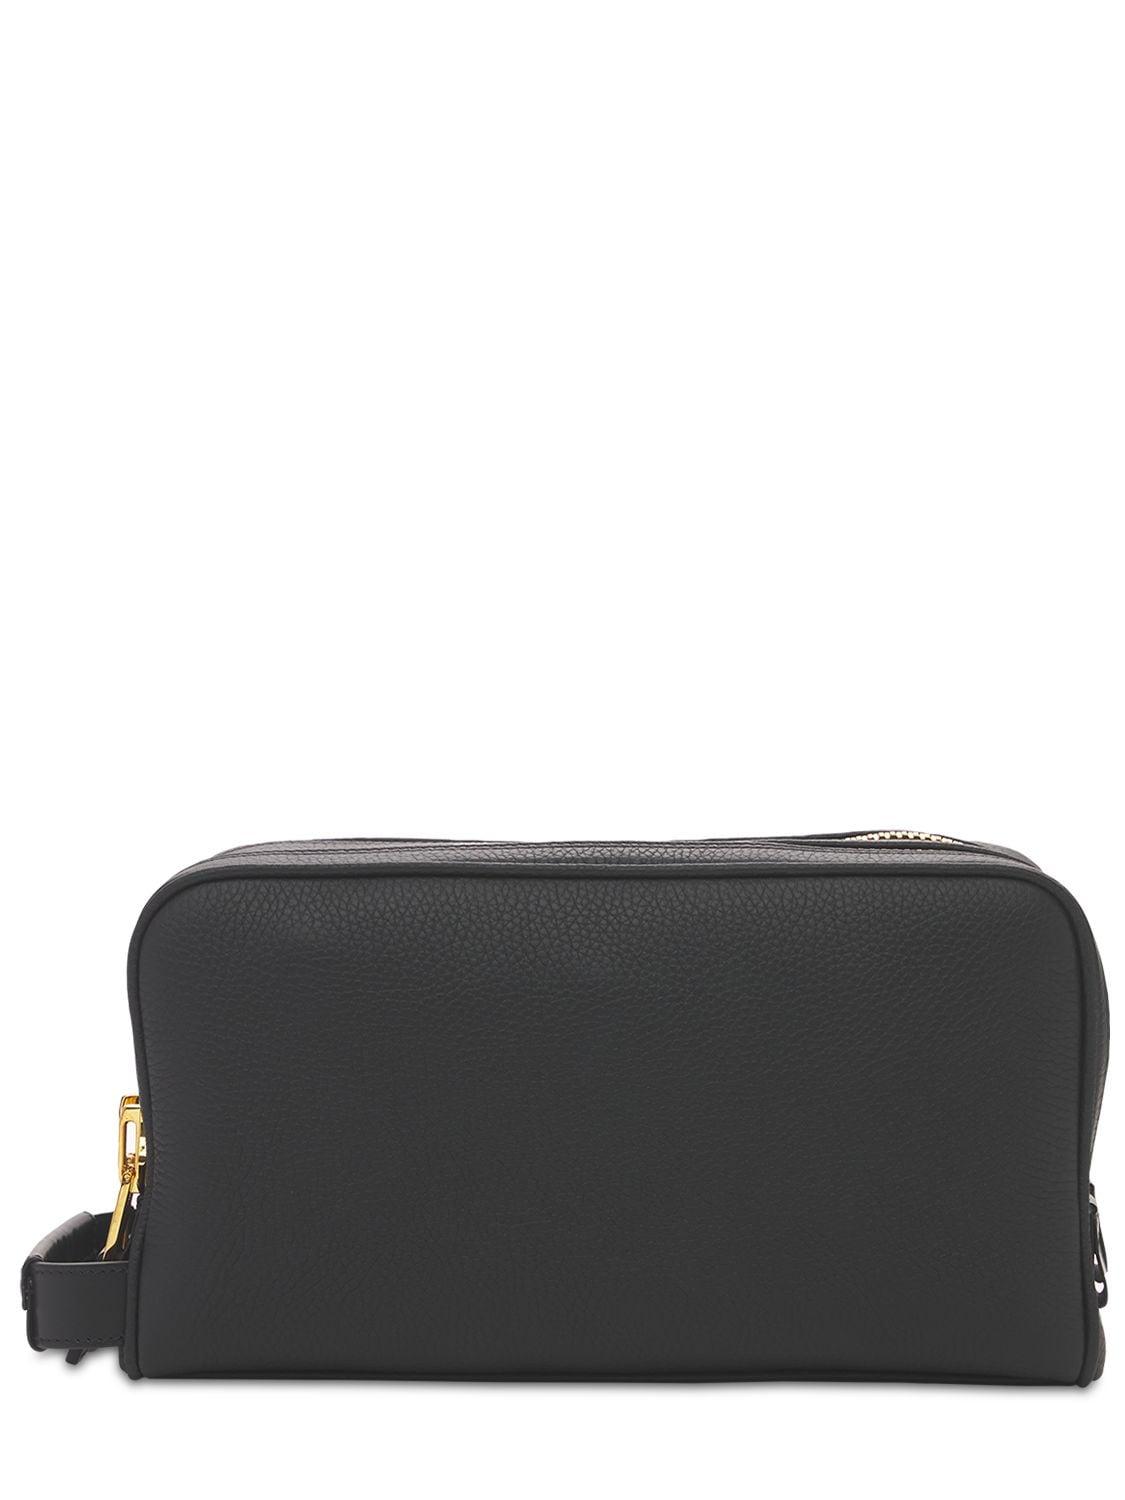 Tom Ford Leather Double Zip Toiletry Bag W/handle in Black for Men | Lyst